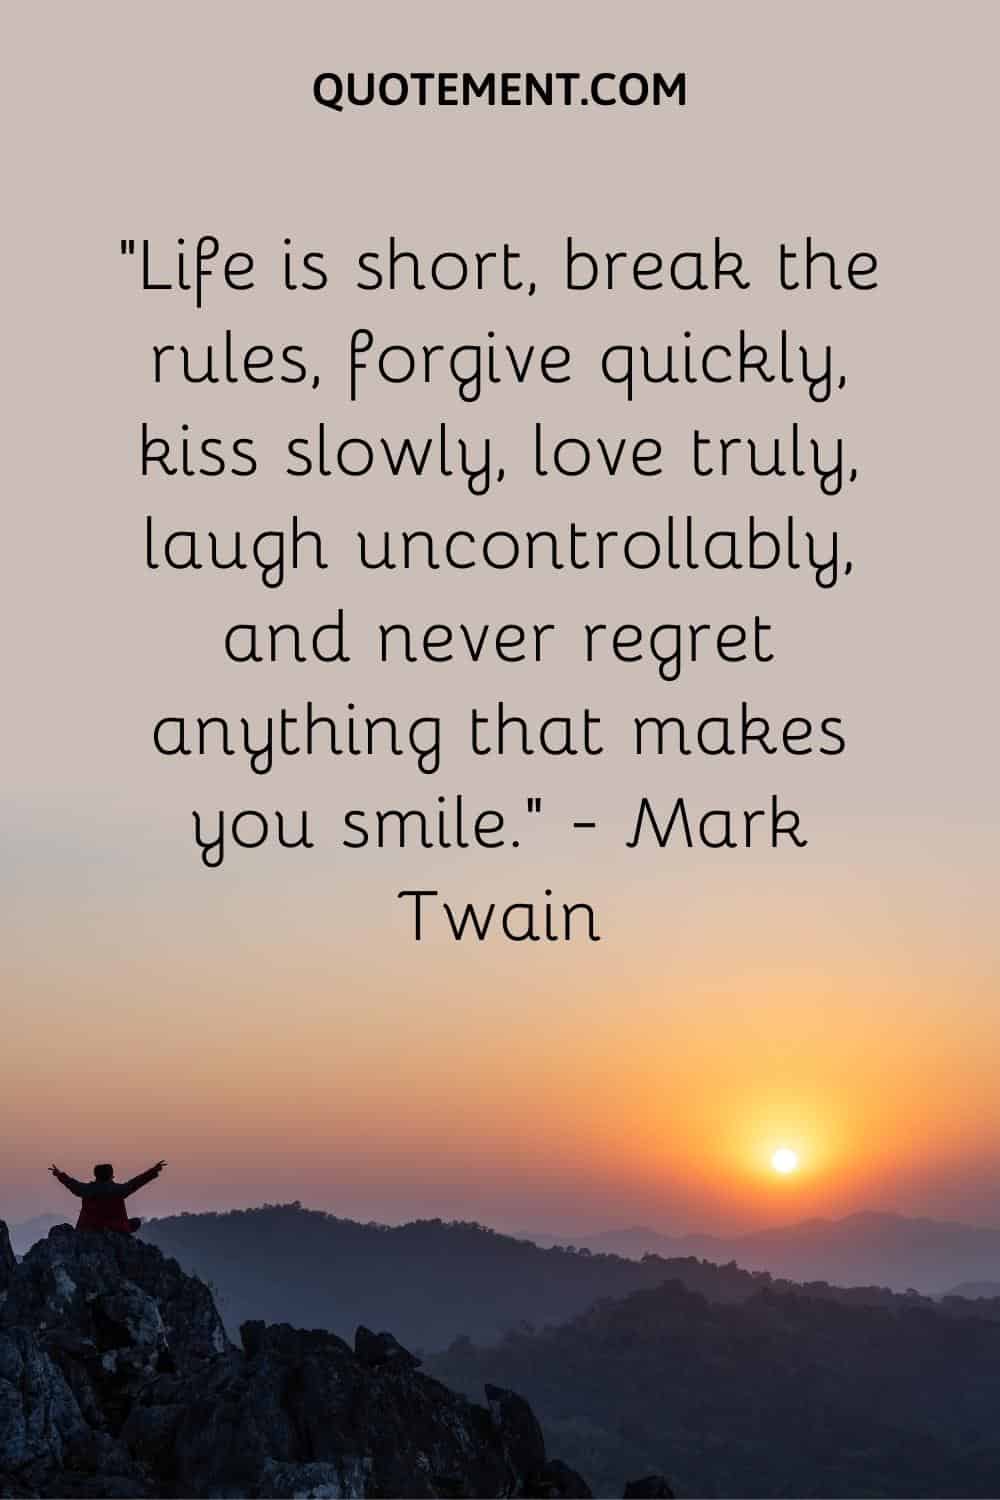 Life is short, break the rules, forgive quickly, kiss slowly, love truly, laugh uncontrollably, and never regret anything that makes you smile